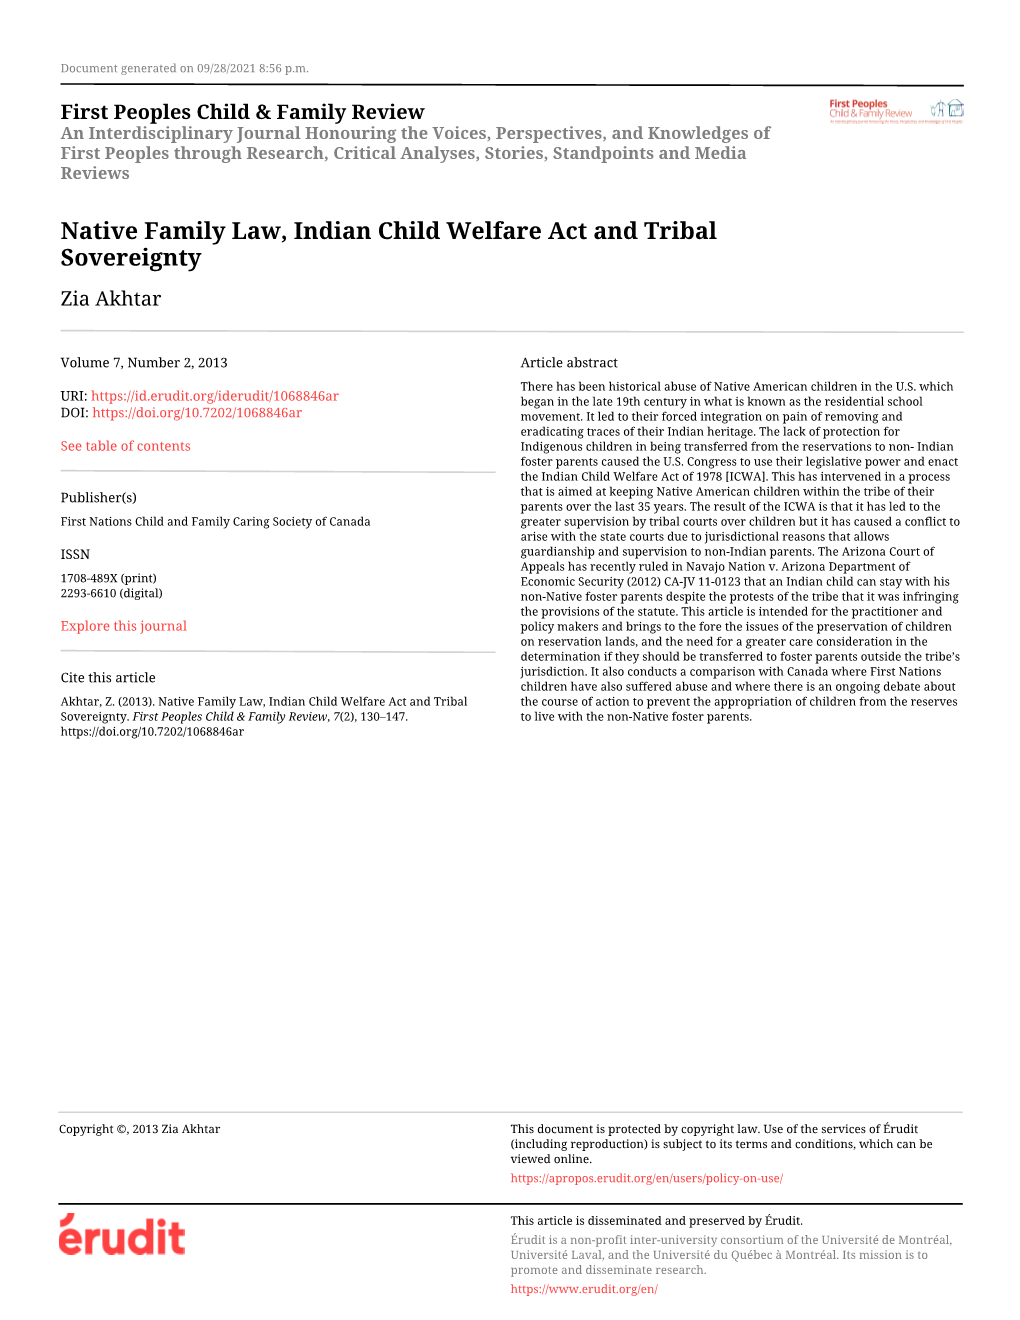 Native Family Law, Indian Child Welfare Act and Tribal Sovereignty Zia Akhtar